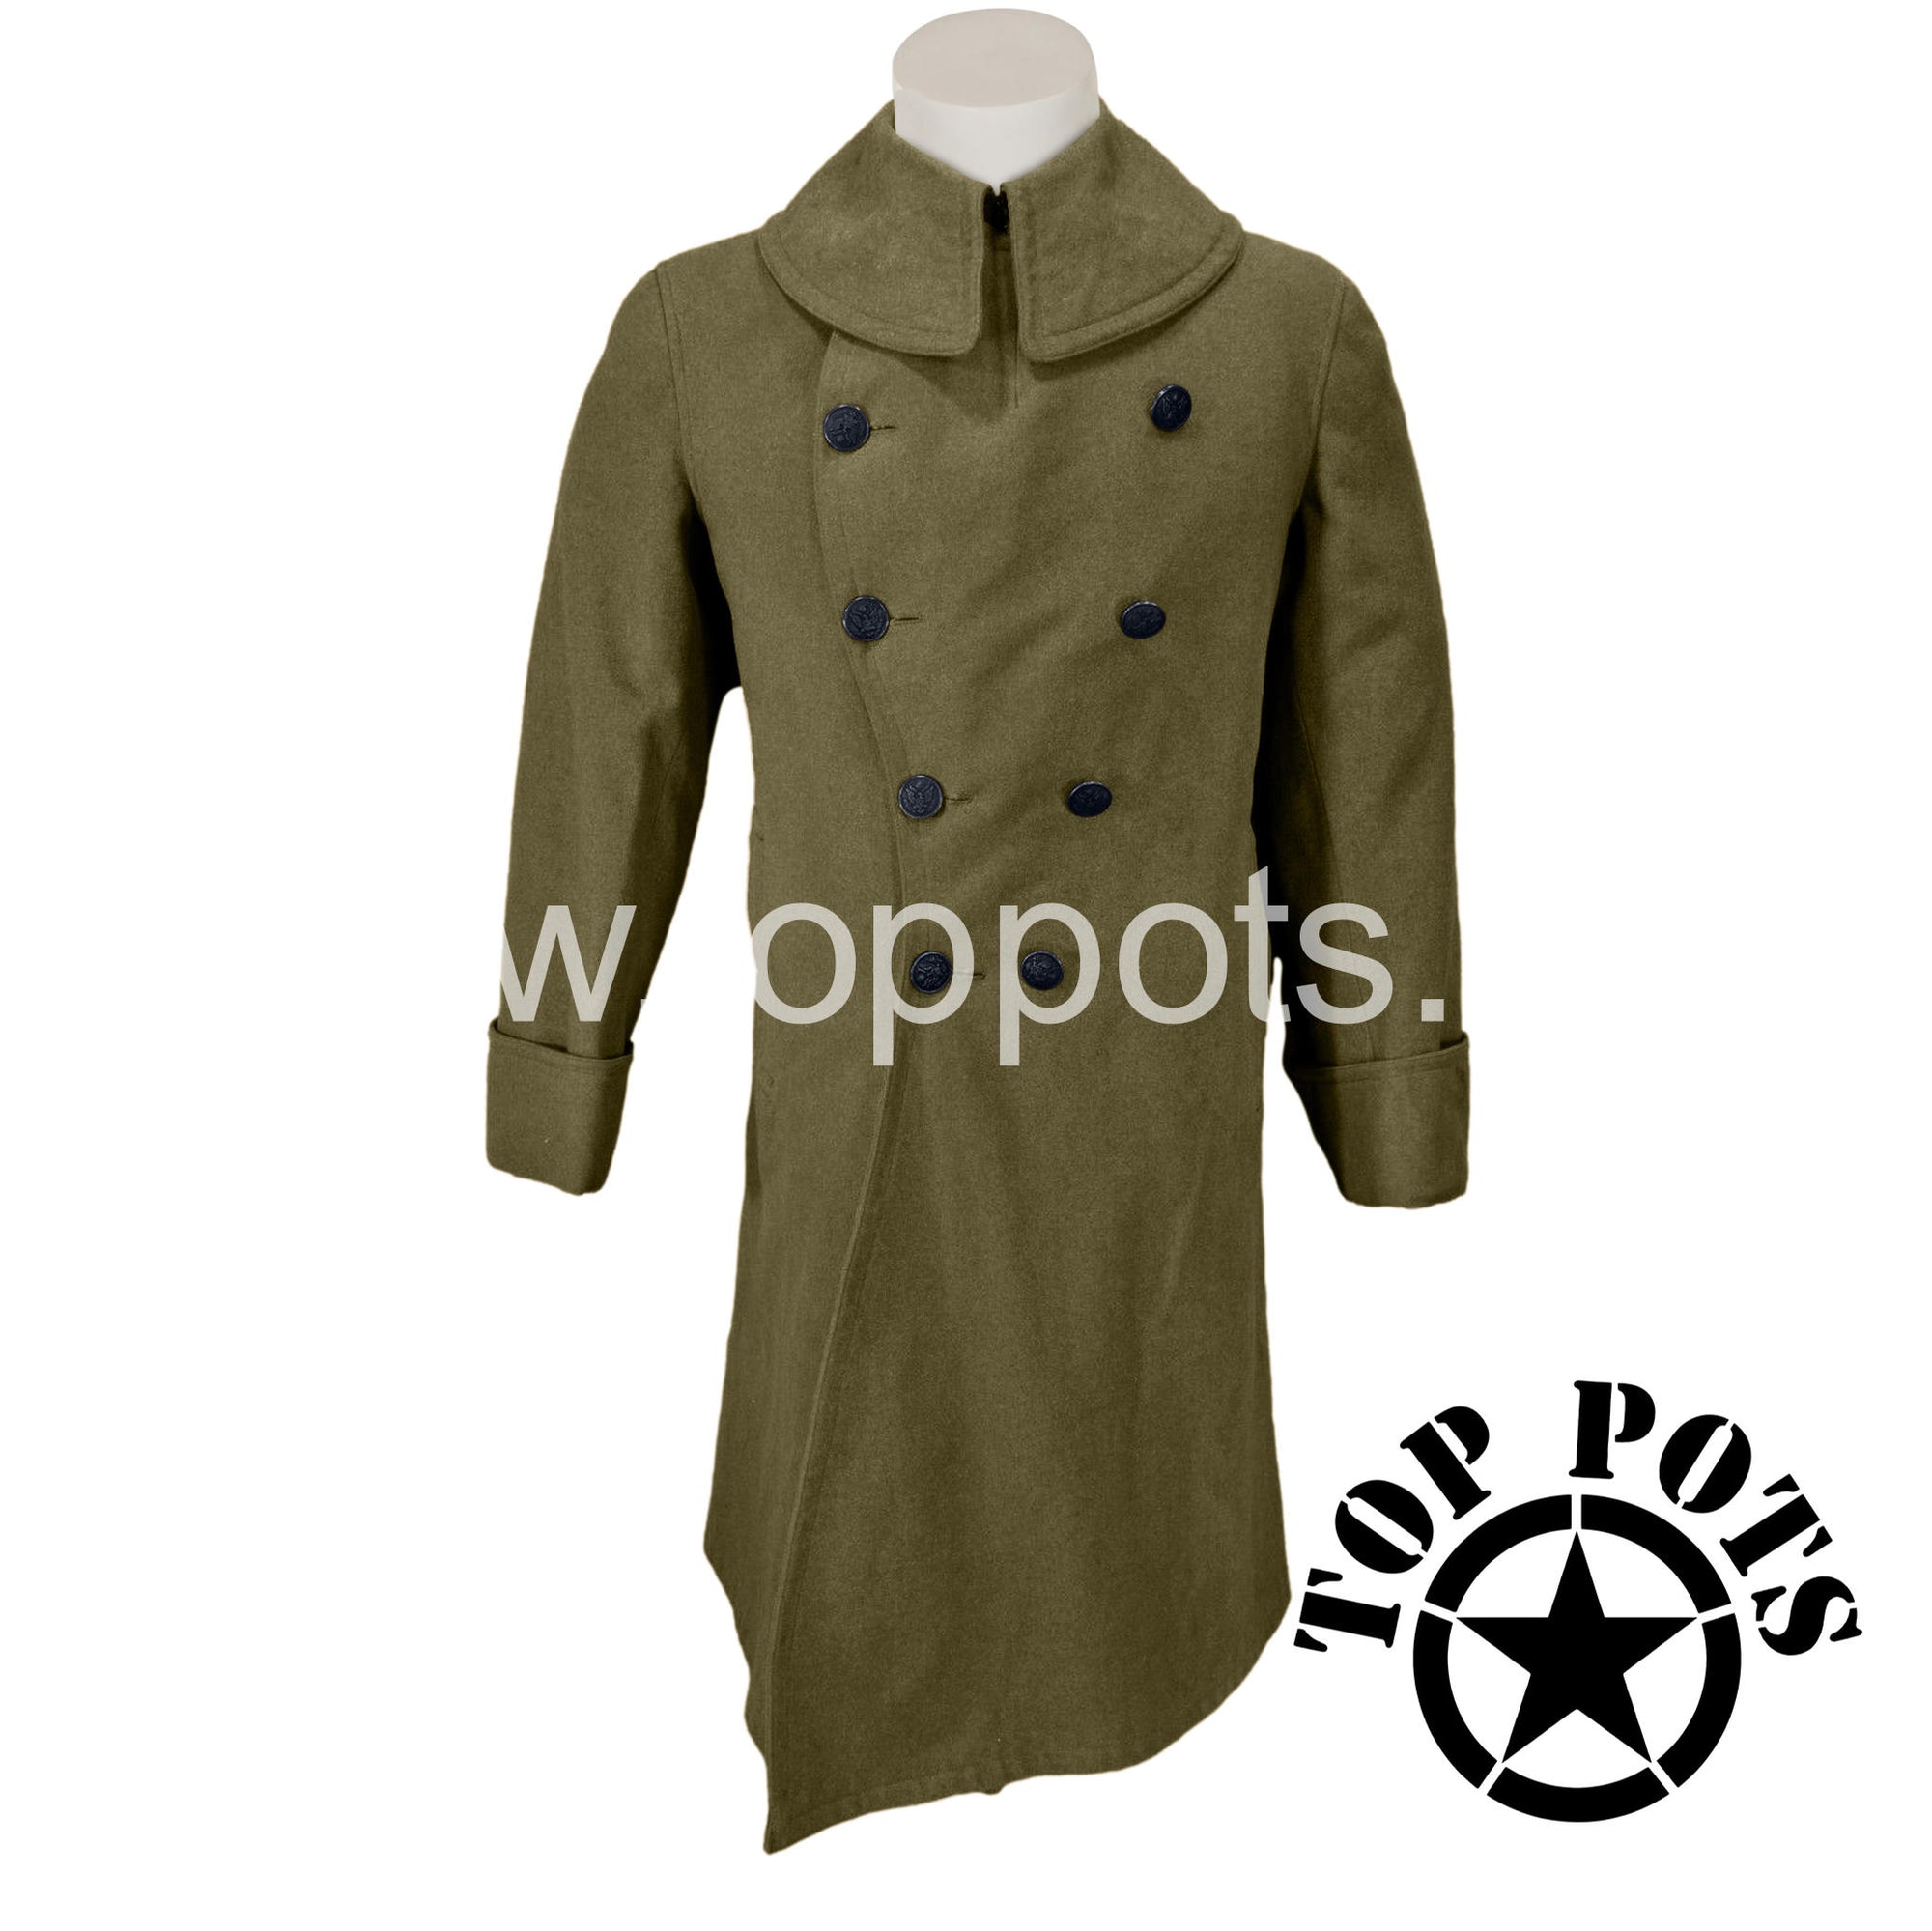 WWI US Army Reproduction American Doughboy M1907 Wool Enlisted Uniform Olive Drab Winter Greatcoat Overcoat Jacket